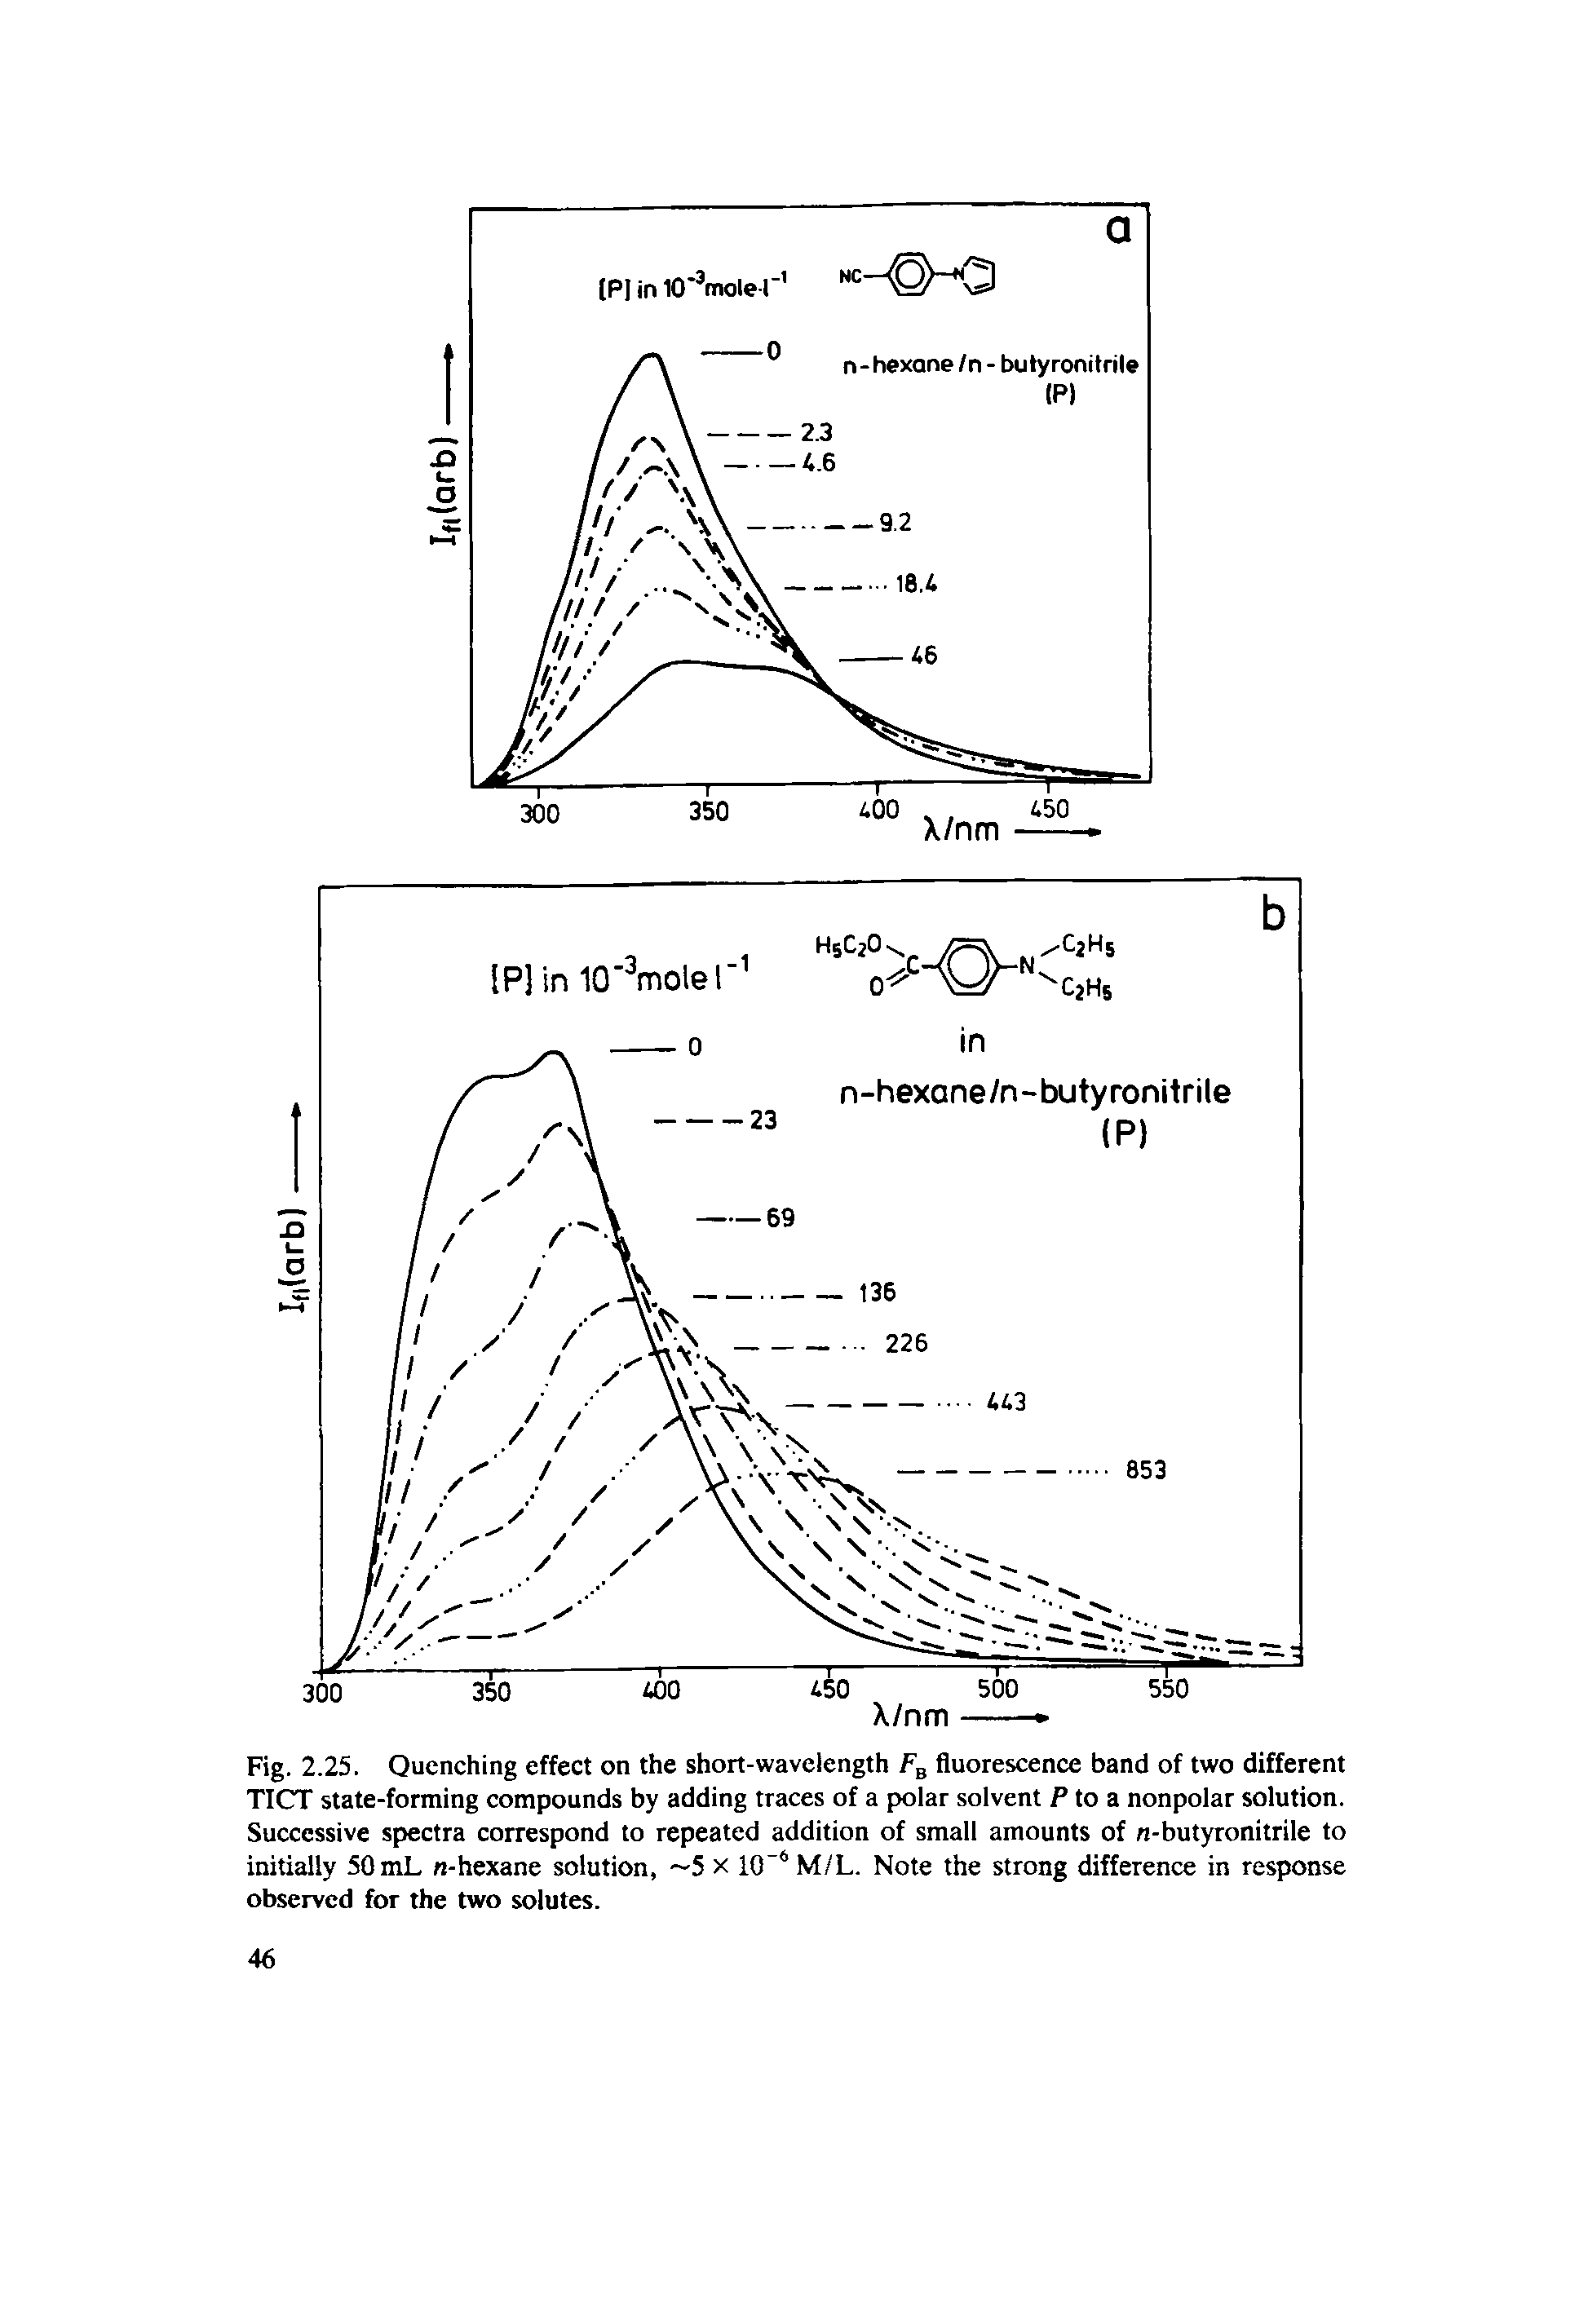 Fig. 2.25. Quenching effect on the short-wavelength FB fluorescence band of two different TICT state-forming compounds by adding traces of a polar solvent P to a nonpolar solution. Successive spectra correspond to repeated addition of small amounts of n-butyronitrile to initially 50 mL n-hexane solution, 5 x 10 6M/L. Note the strong difference in response observed for the two solutes.